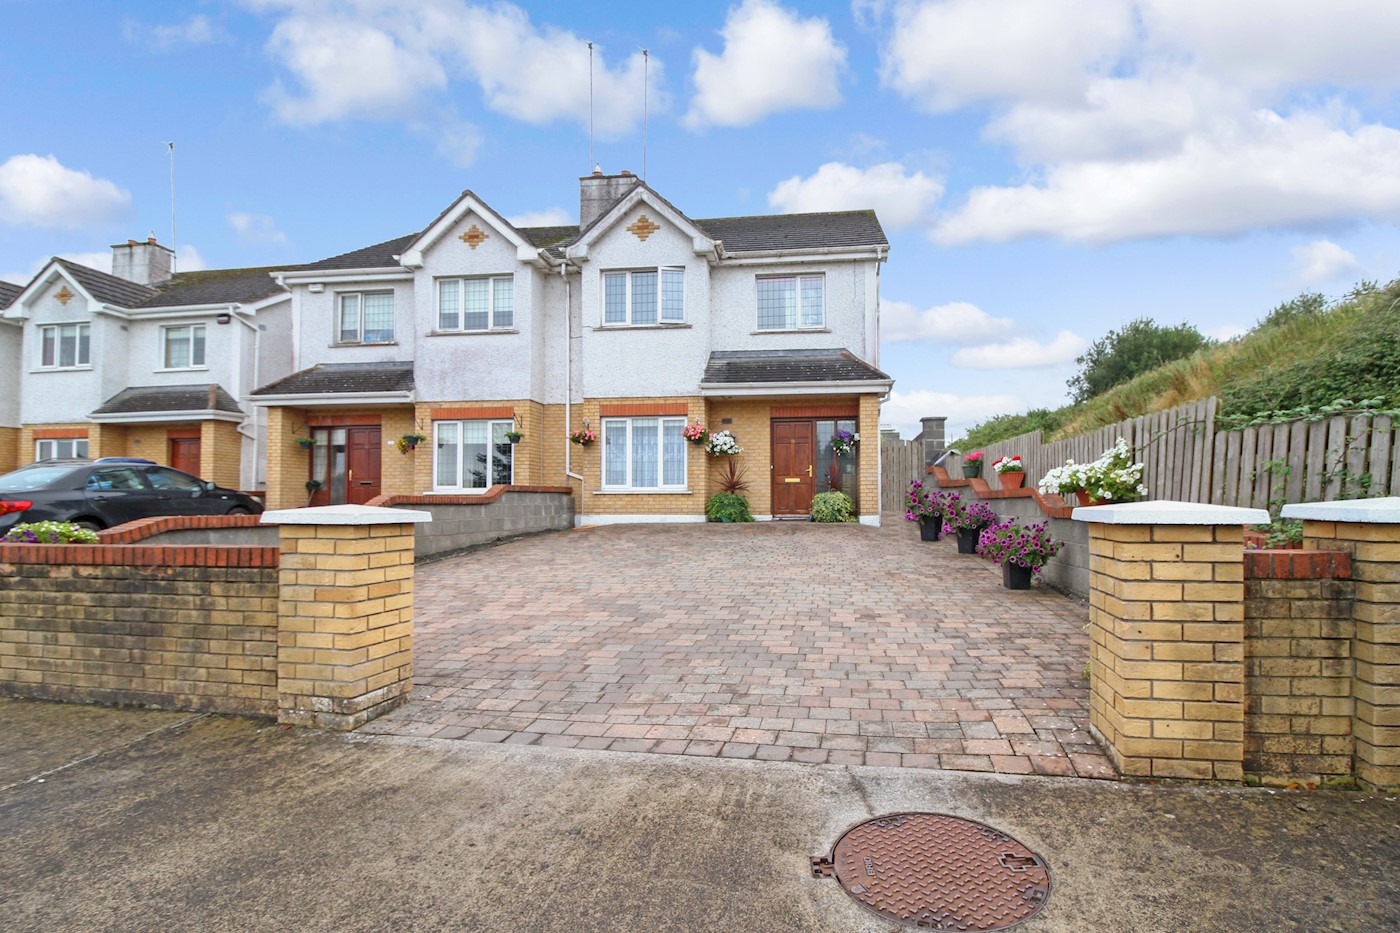 35 Turry Meadows, Athboy, Co. Meath, C15 F3A3 1/2